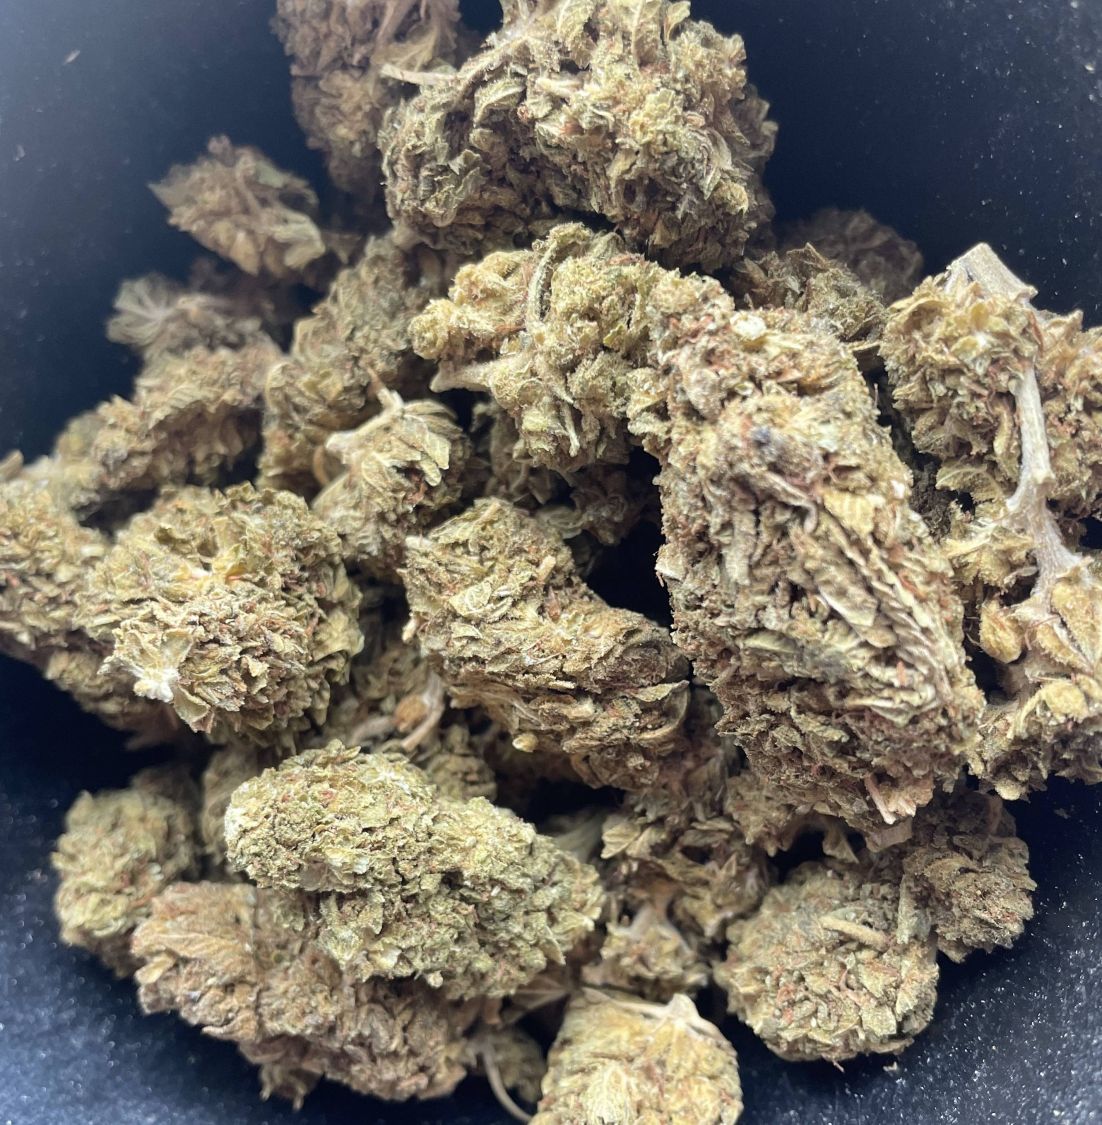  $60 PANTY DROPPER FULL OZ SPECIAL!! Flower Indica